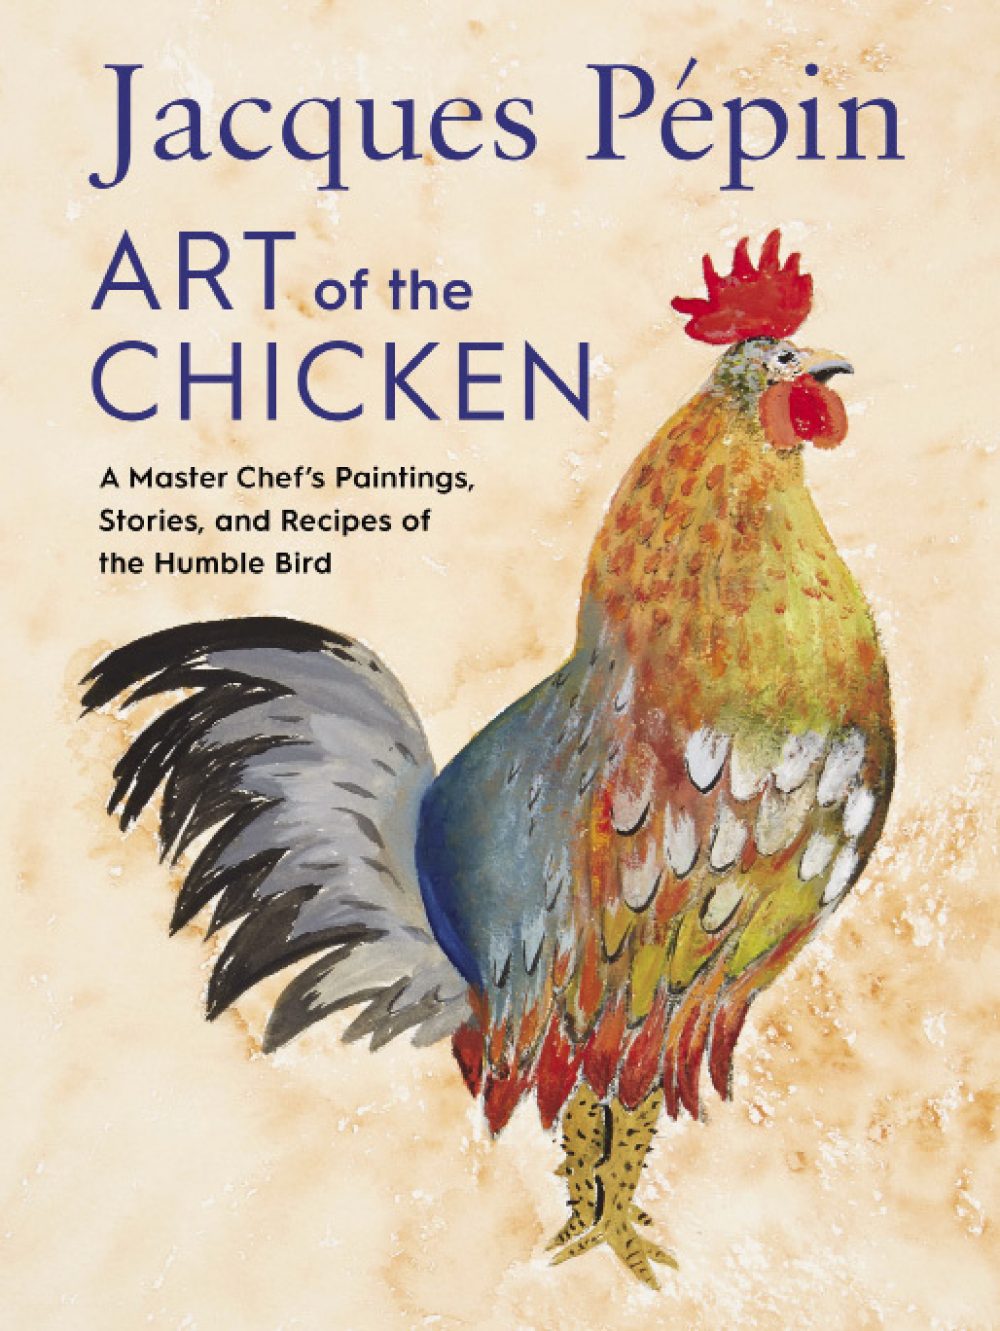 Jacques Pépin Art of the Chicken ﻿﻿﻿﻿By Jacques Pépin